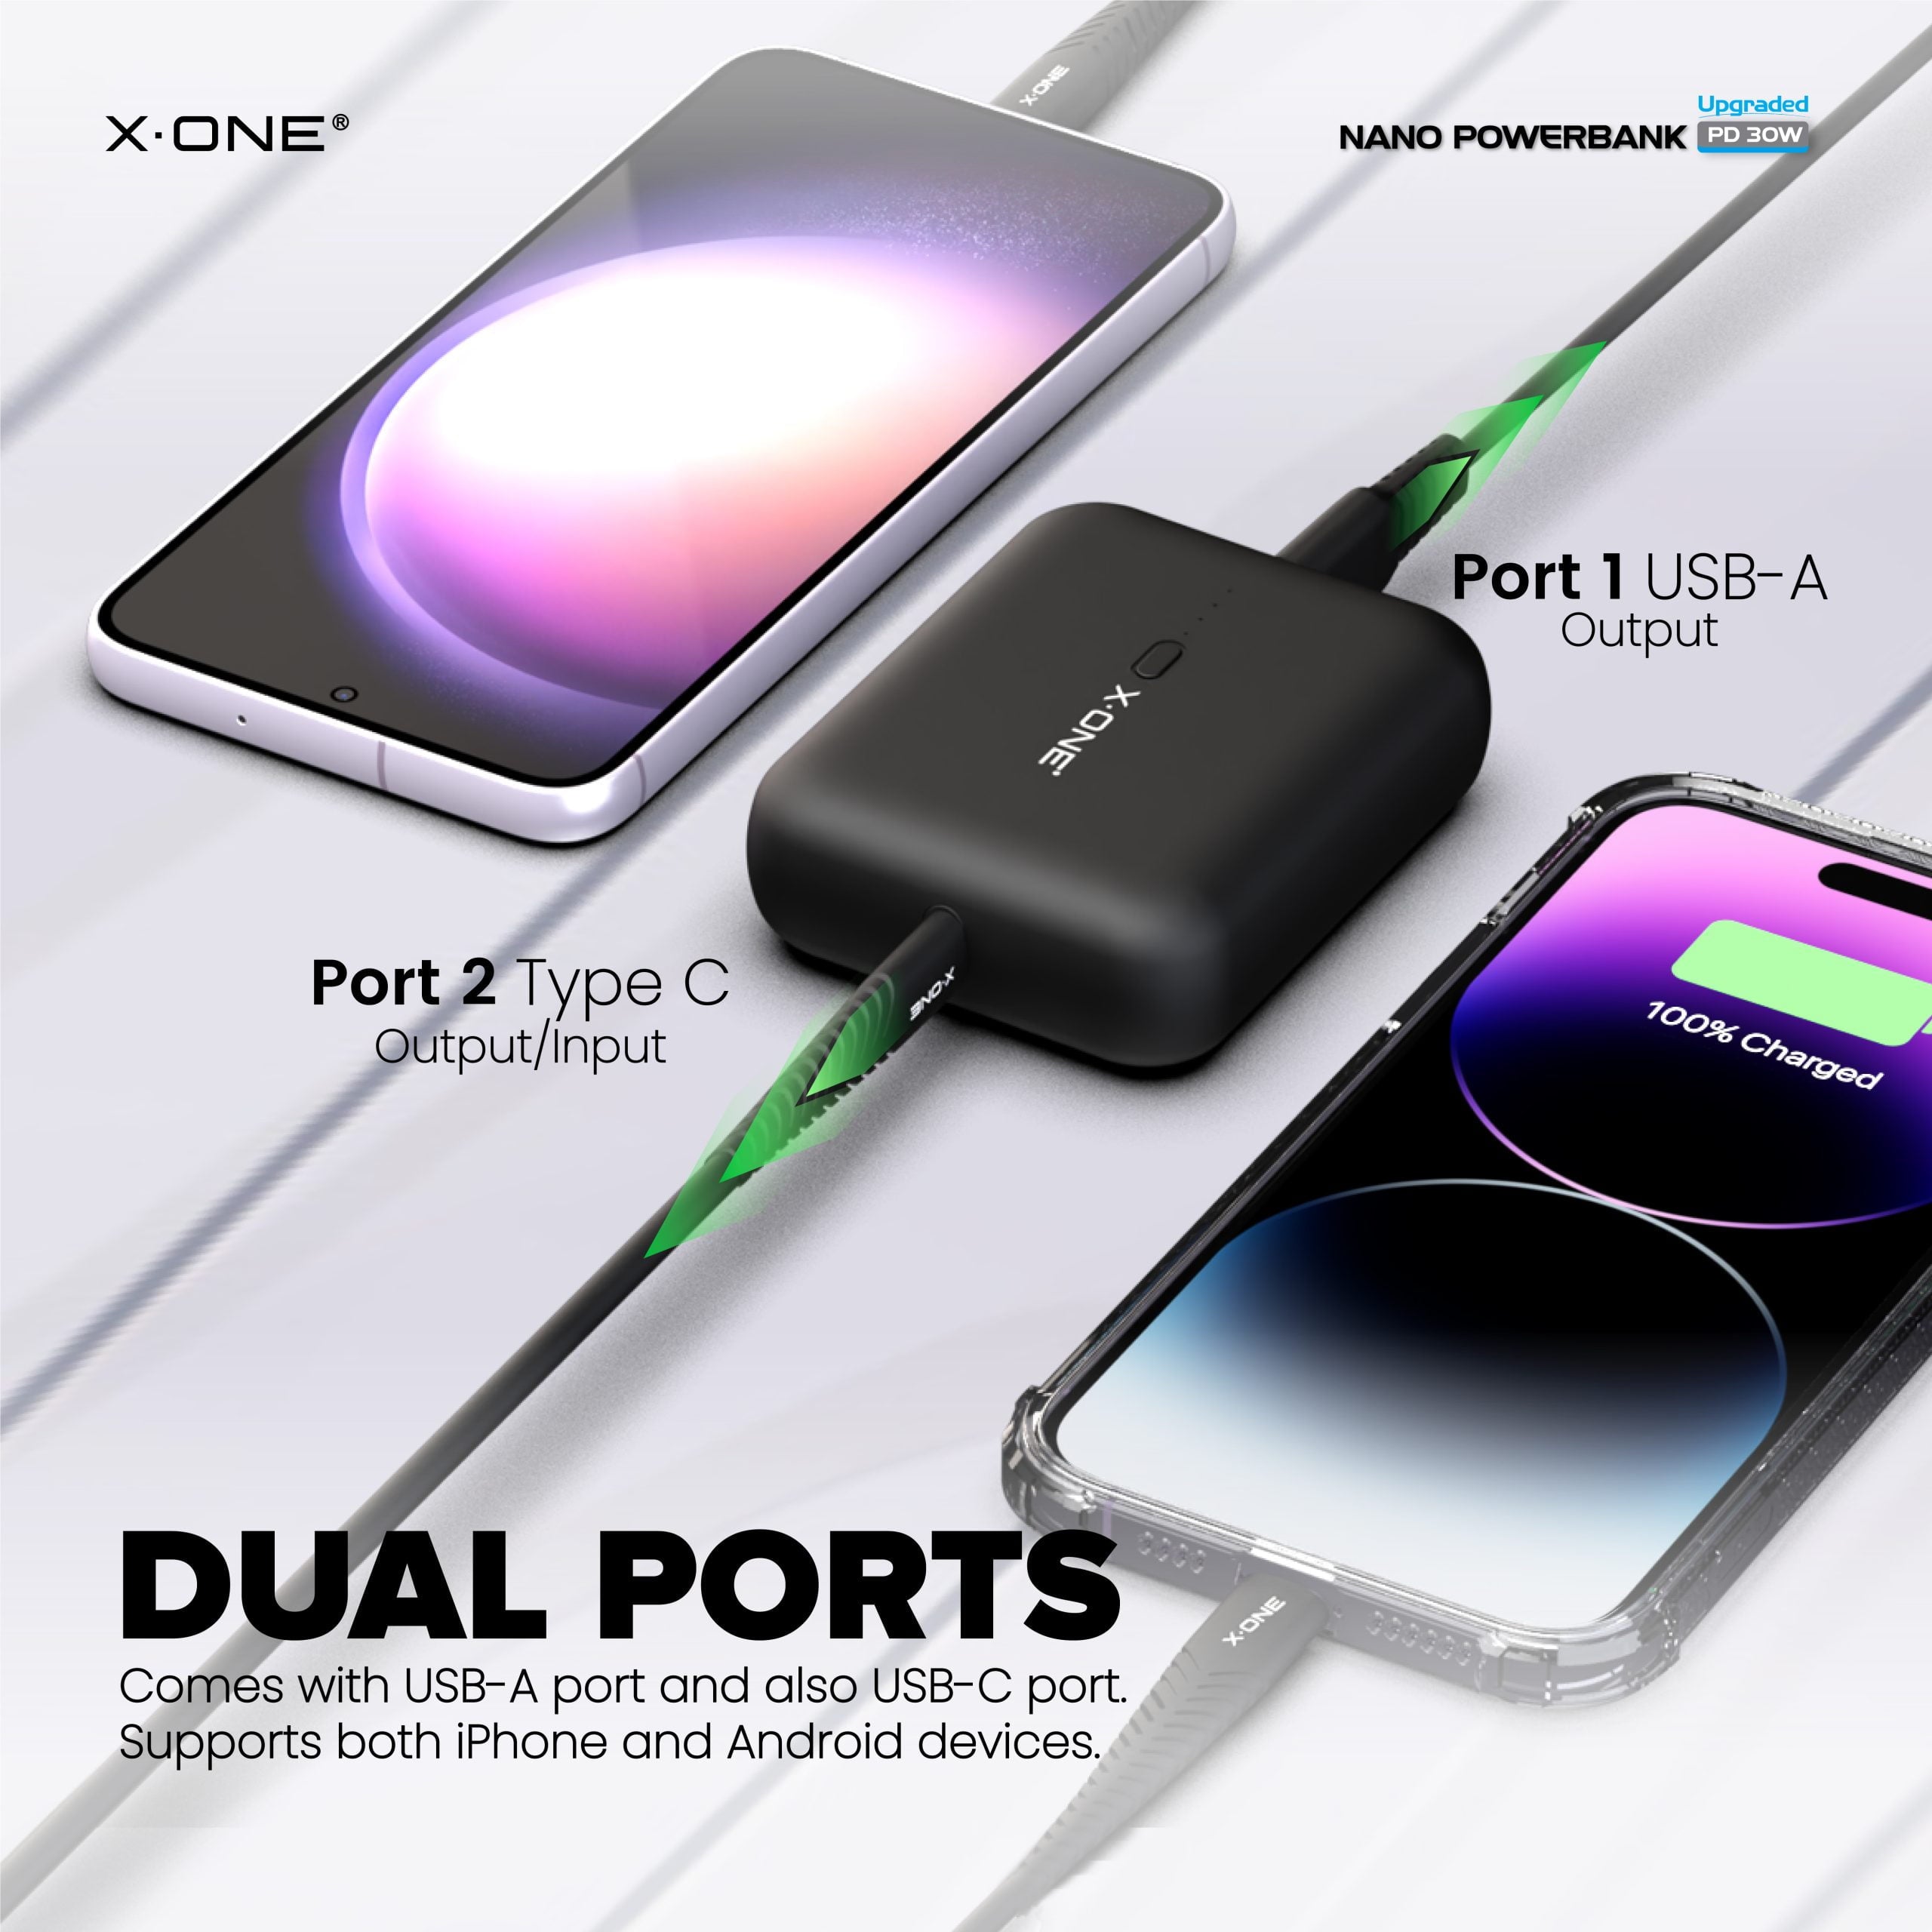 X.One® PD3.0 30W 10000mAh Nano Powerbank for iPhone PD Fast Charge | Samsung Super Fast Charge | Huawei Super Charge 22.5W | QC4+